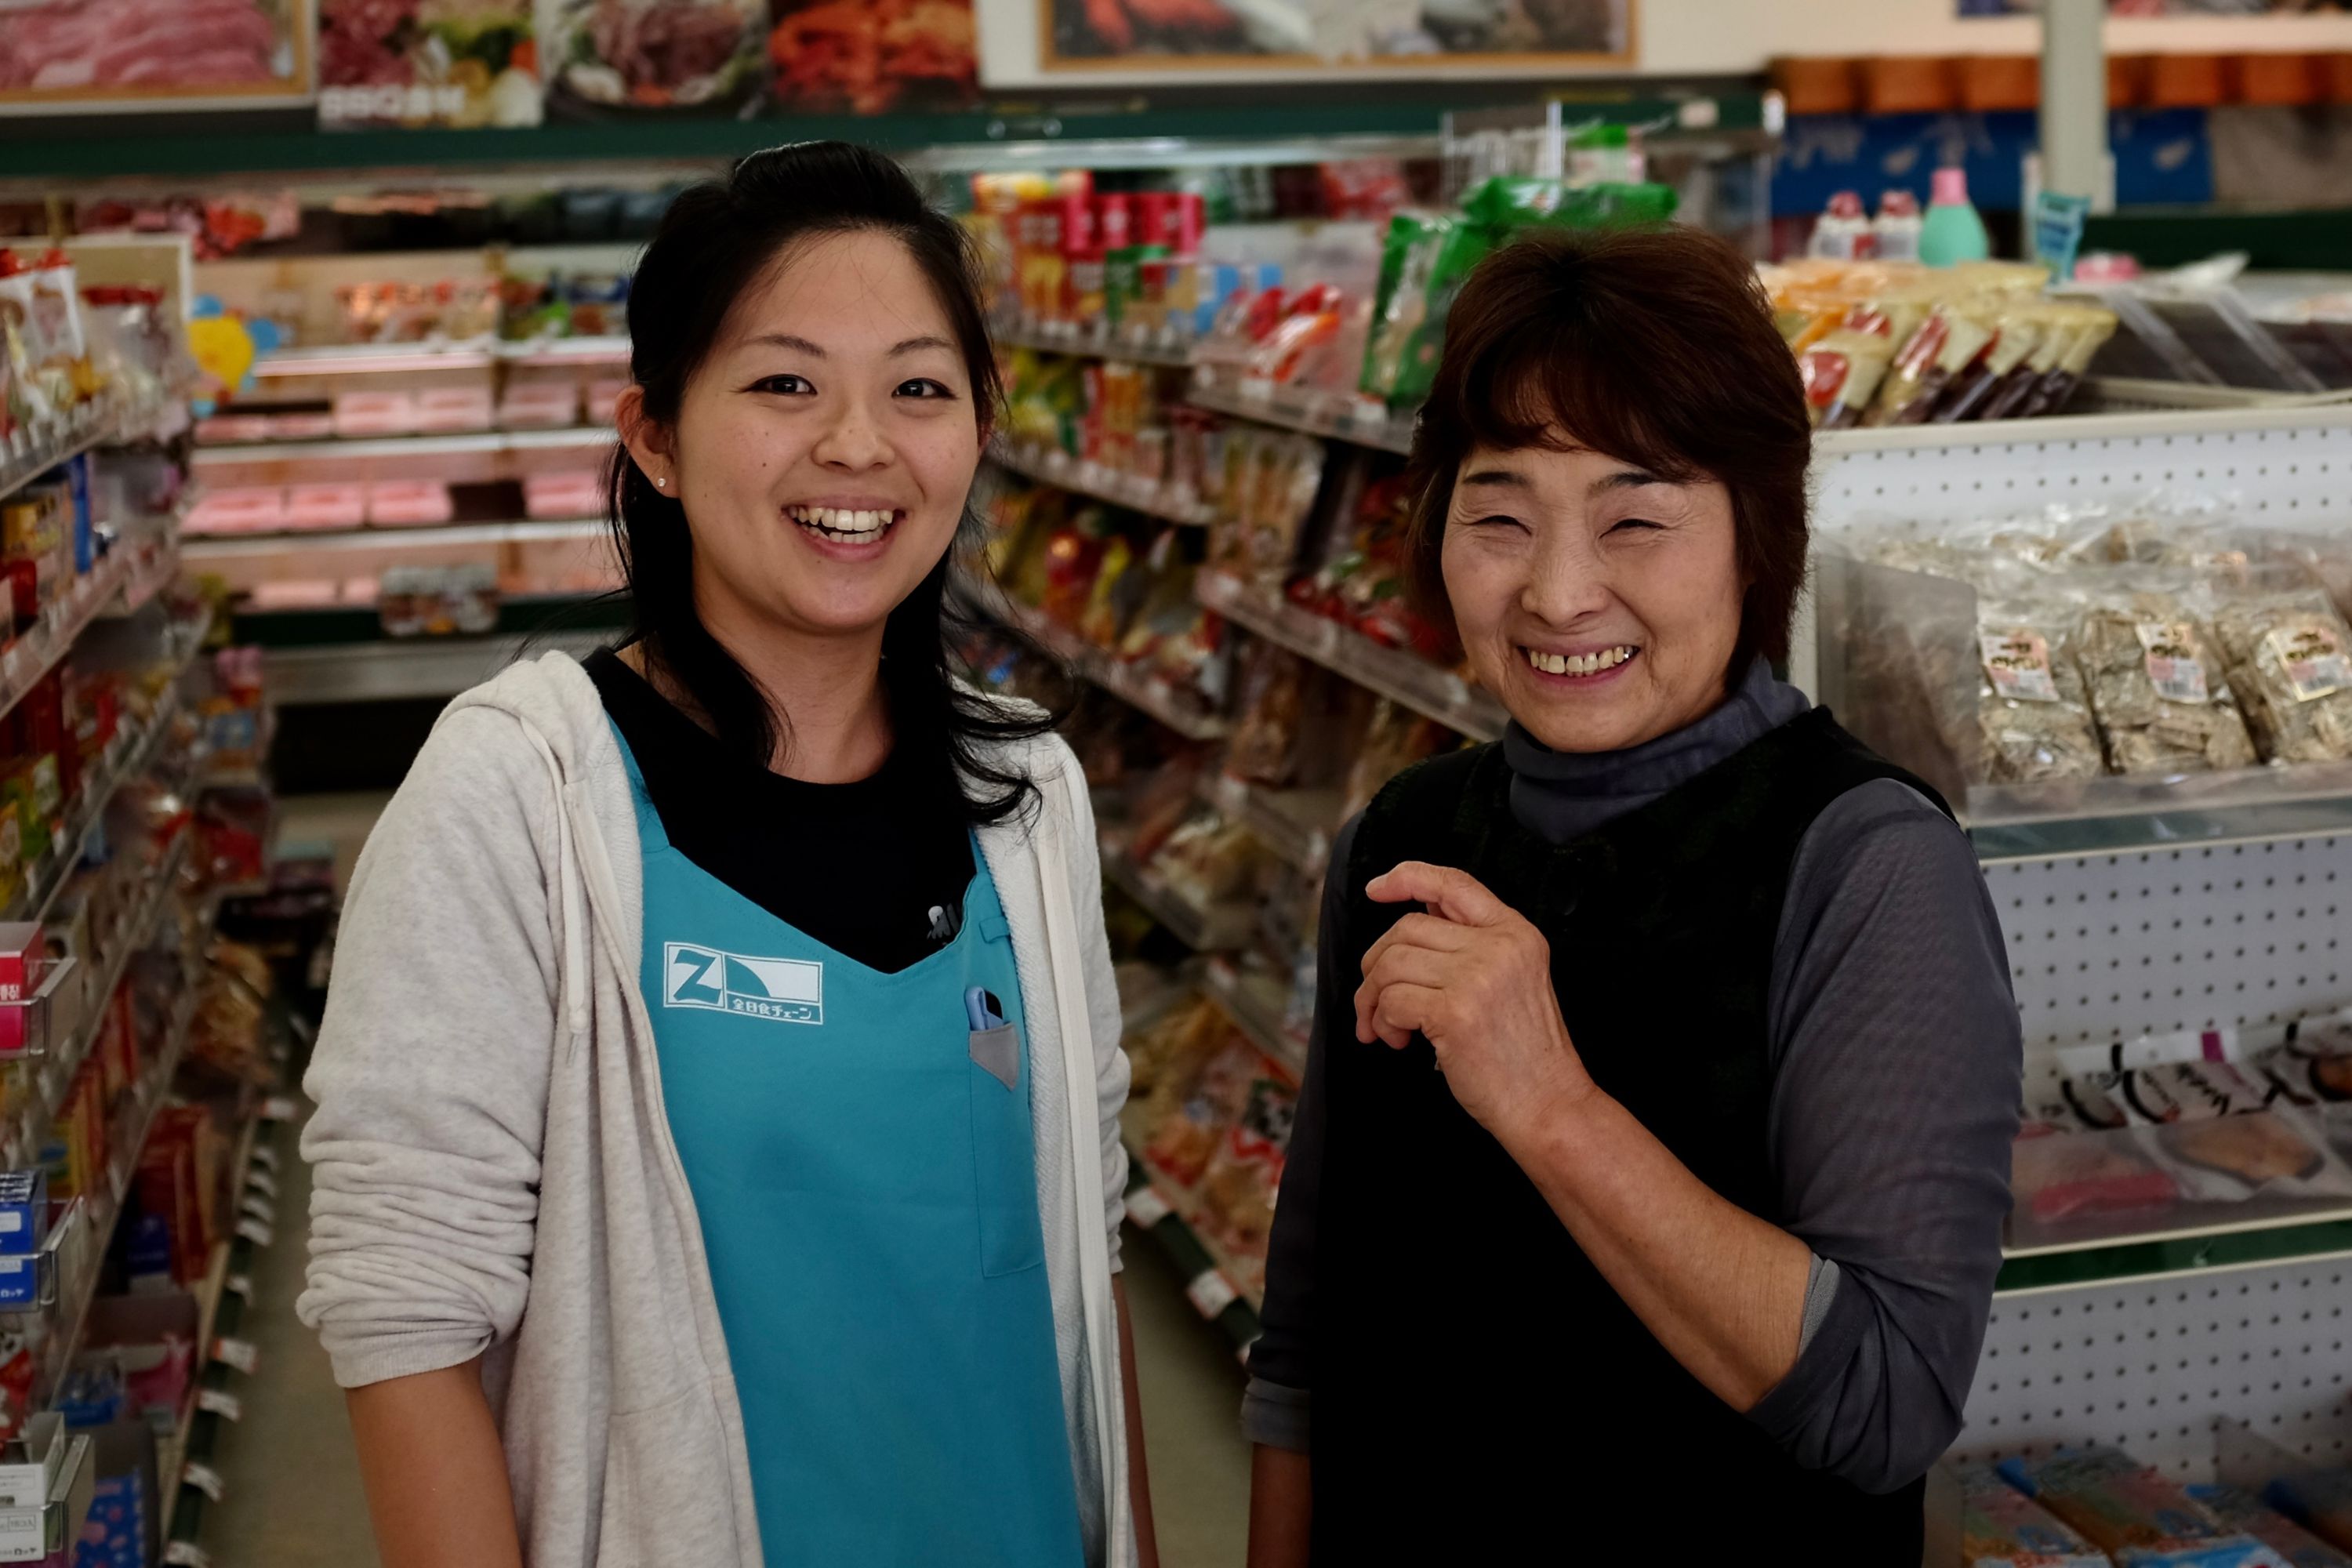 Two shopkeepers, a younger and an older woman, smile into the camera in their shop.